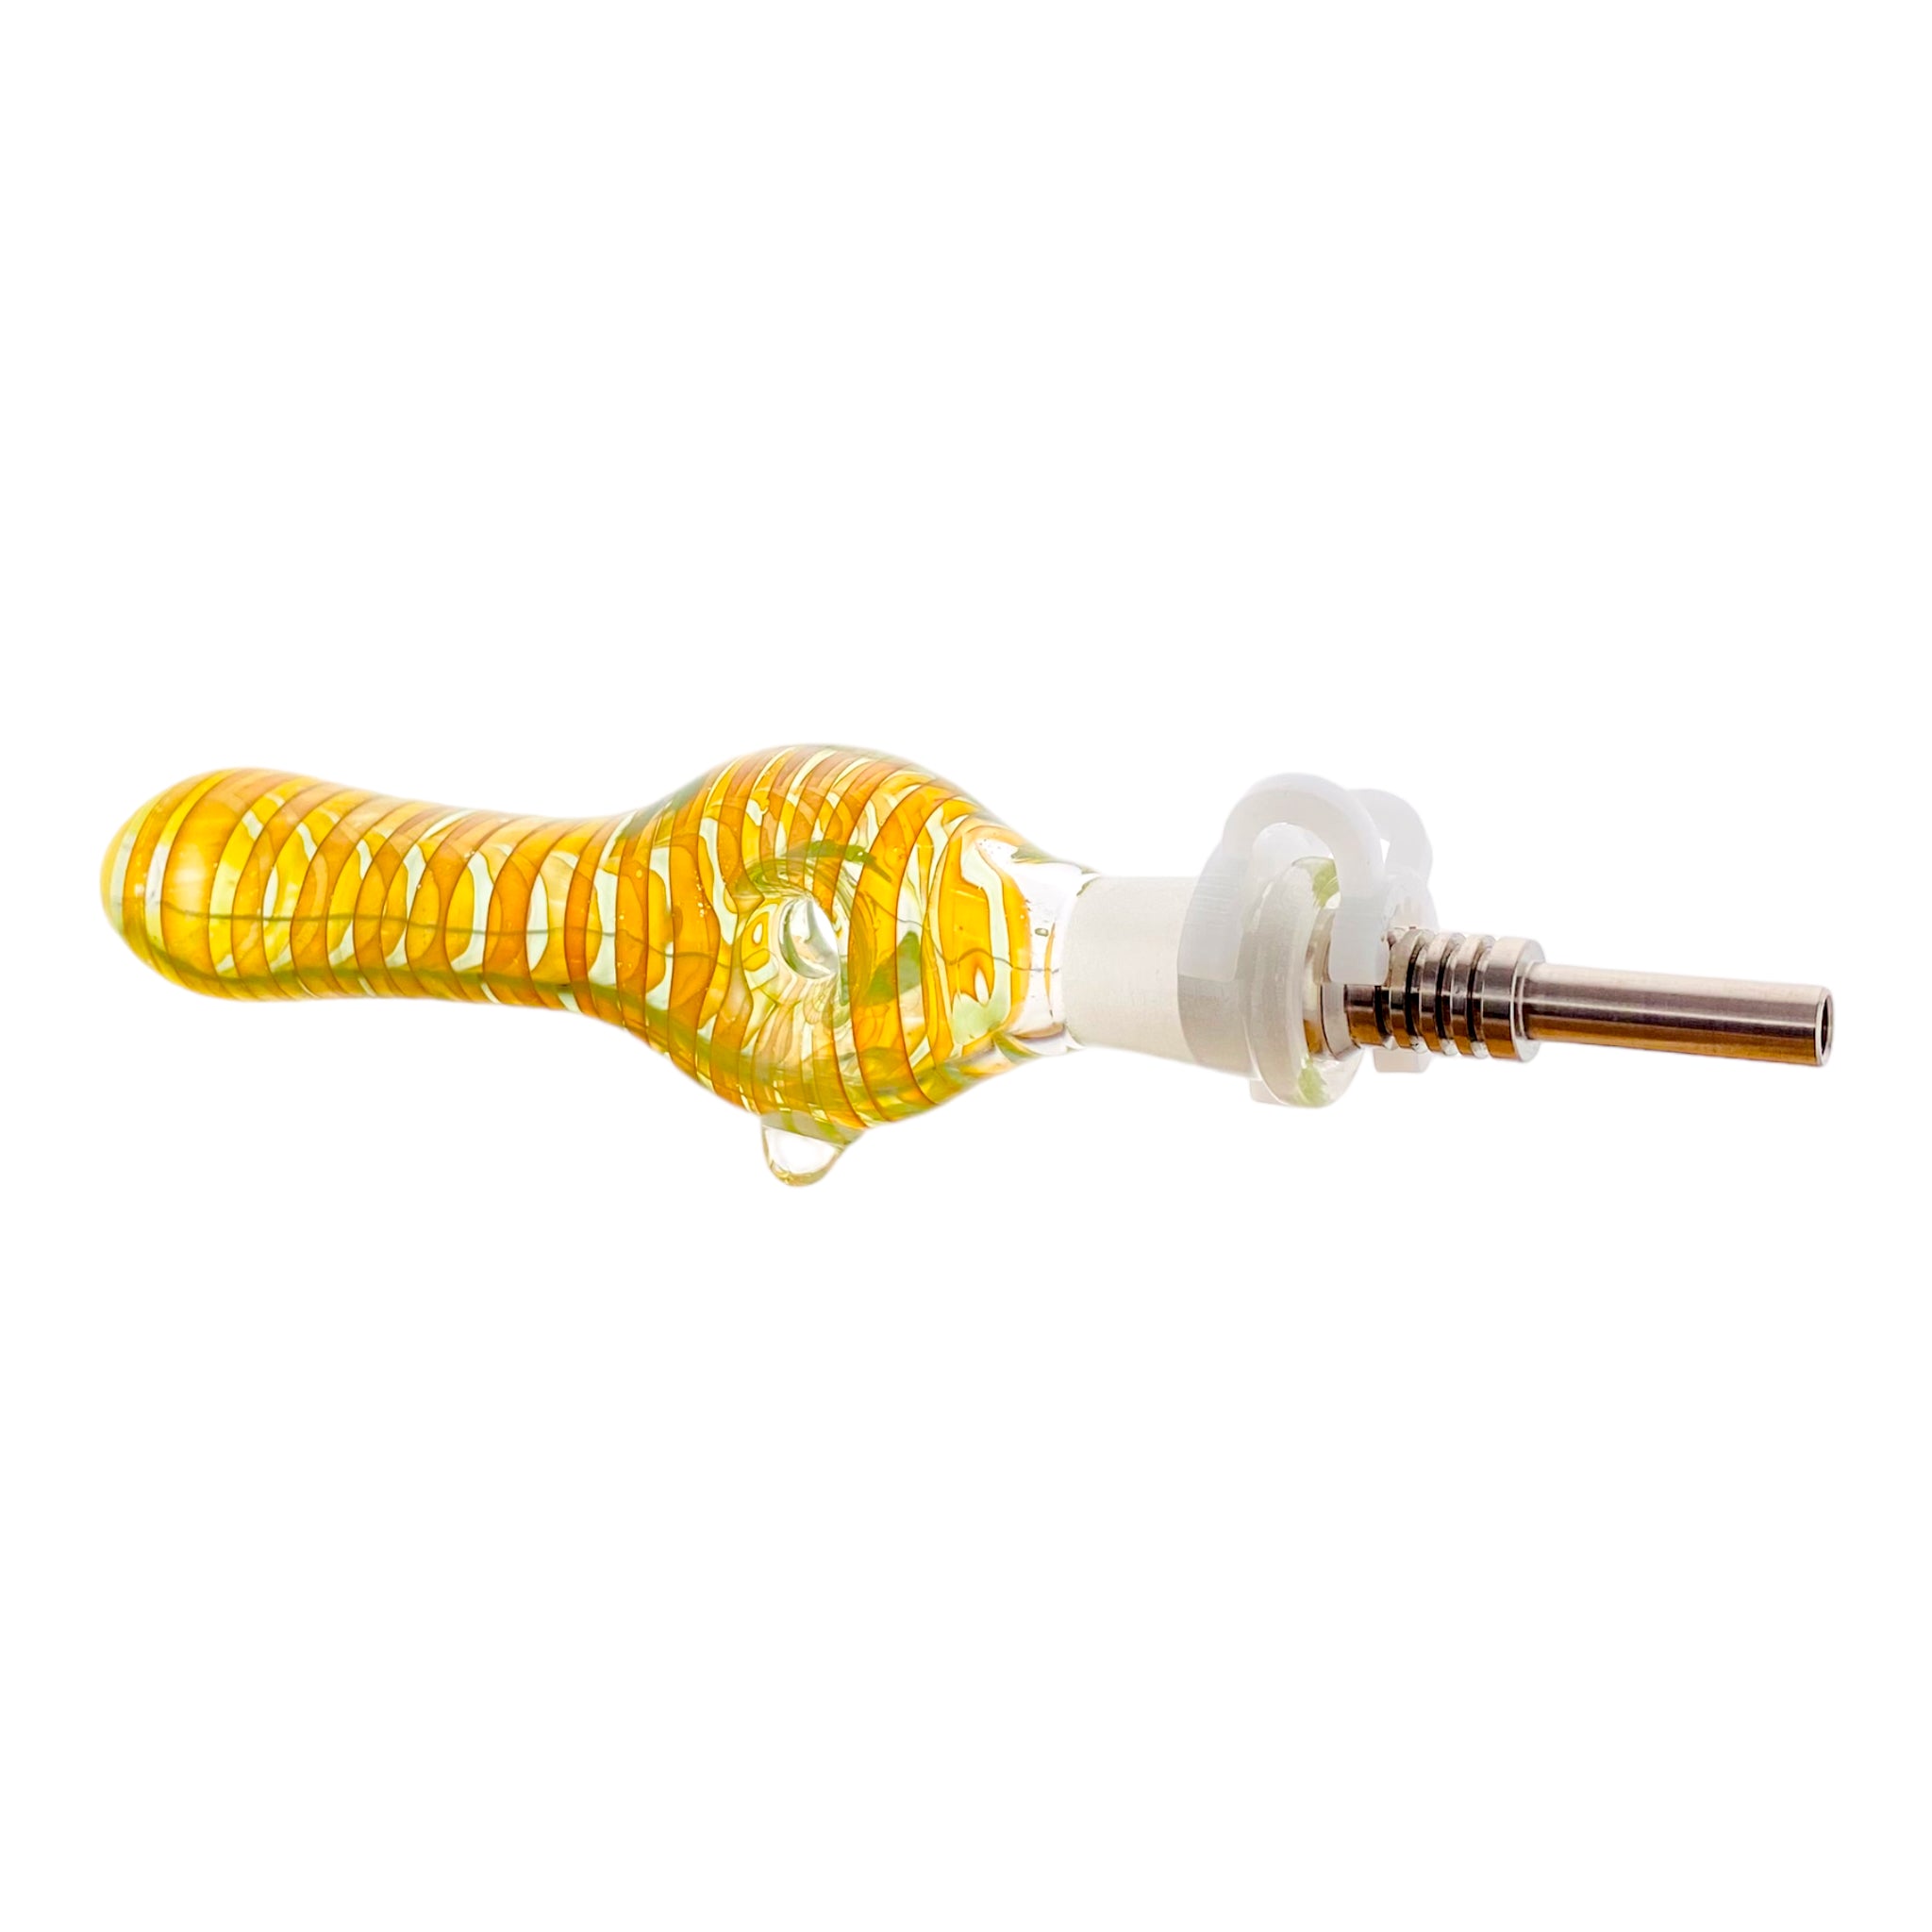 10mm Nectar Collector - Mini Glass Gold Fumed Donut With Titanium Tip